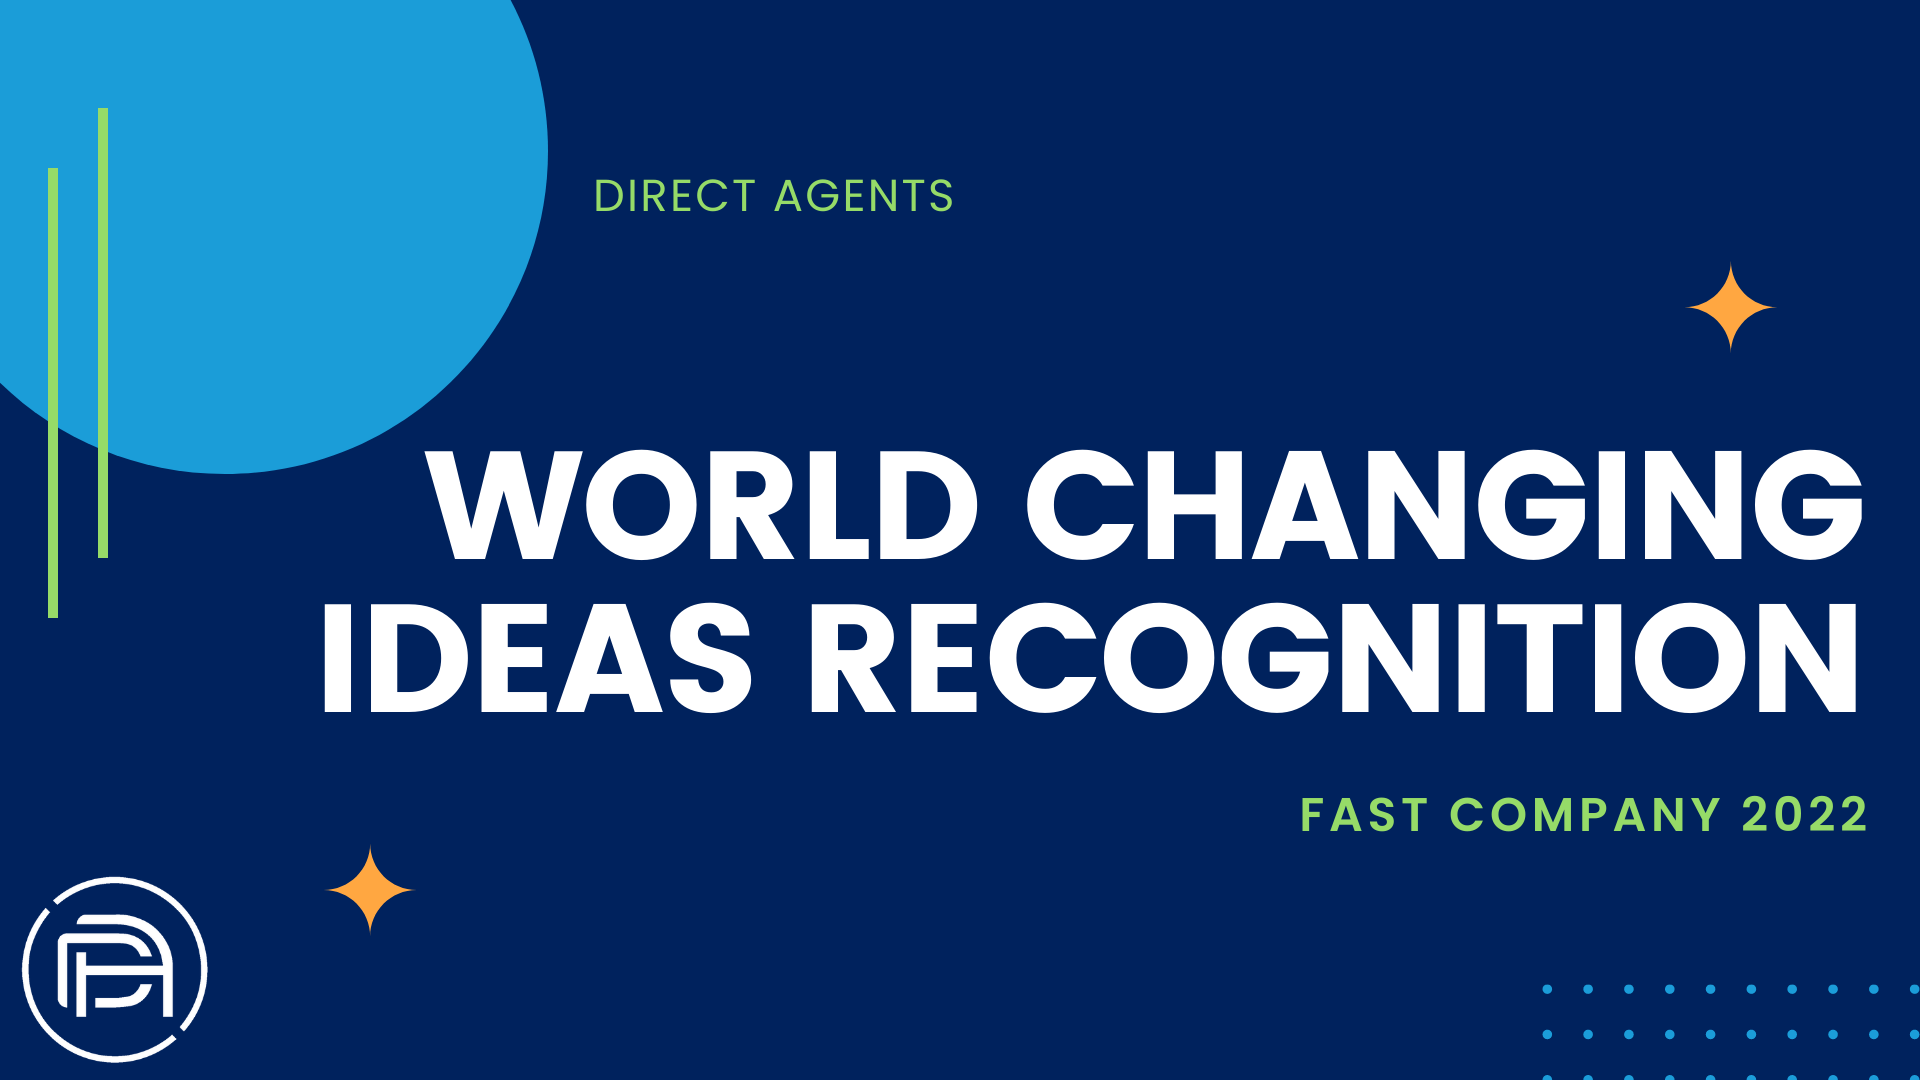 World Changing Ideas Recognition – Fast Company 2022